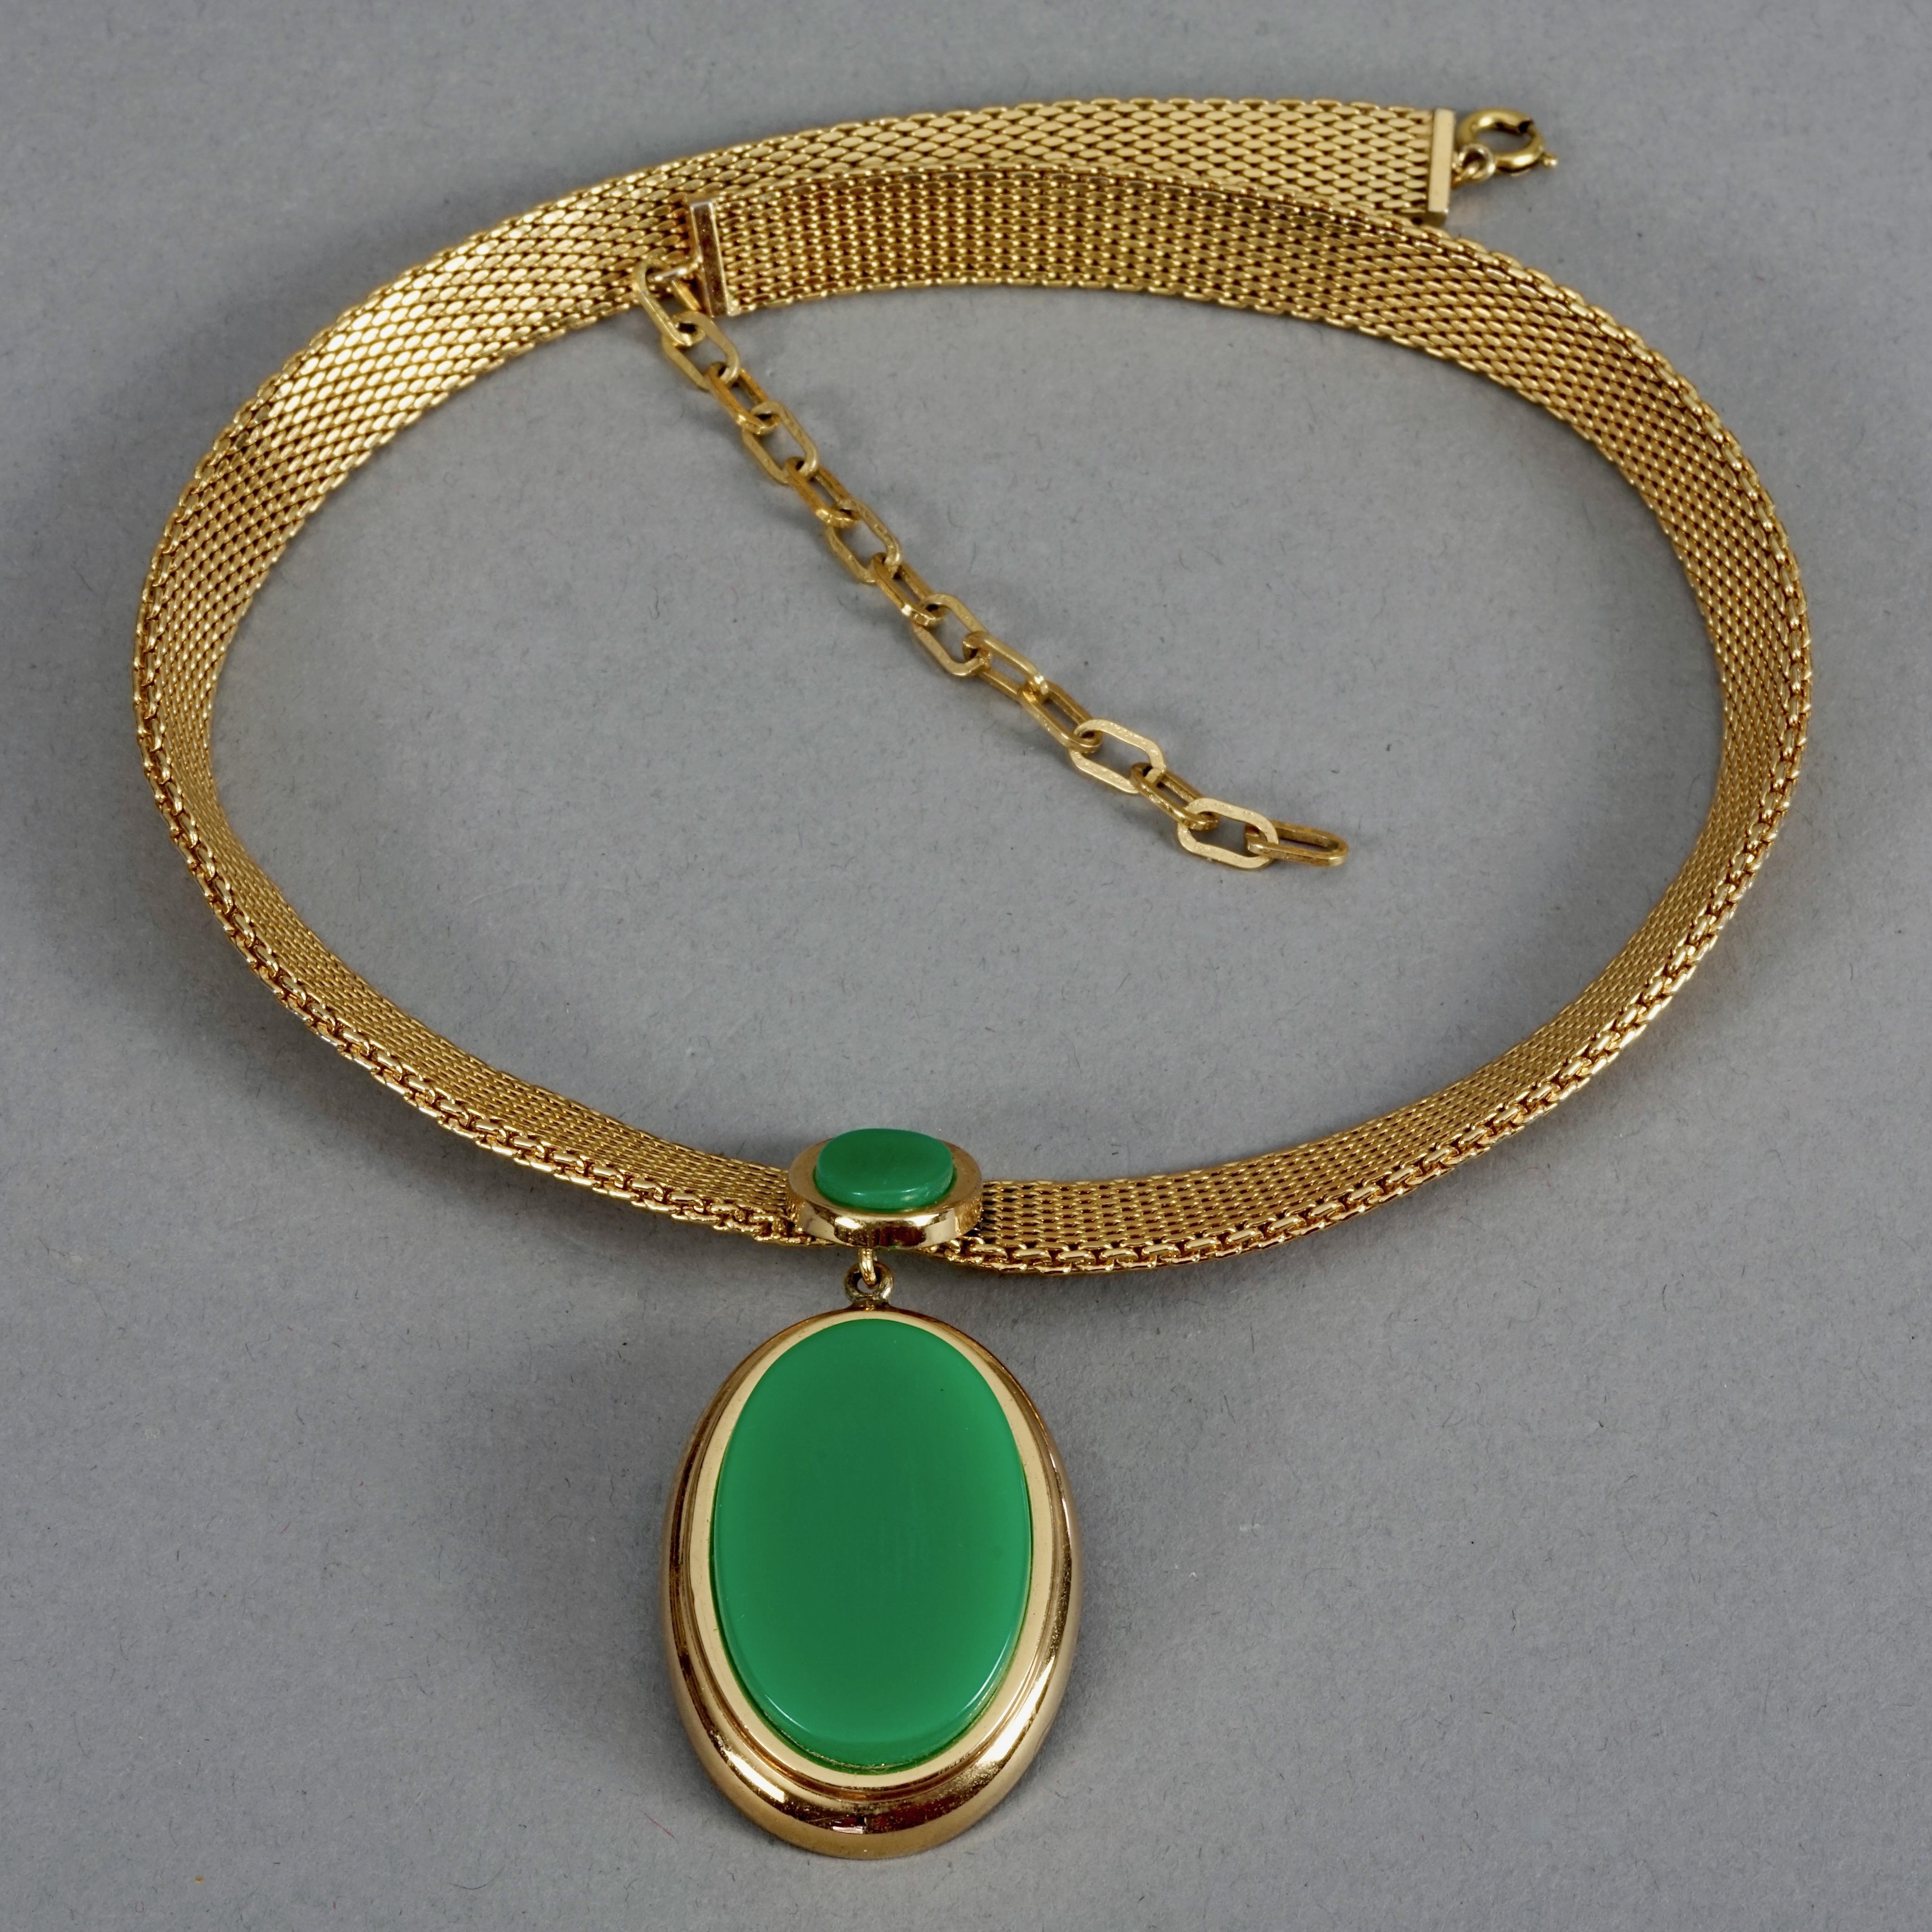 Vintage 1971 CHRISTIAN DIOR Double Oval Green Pendant Chain Necklace For Sale 1